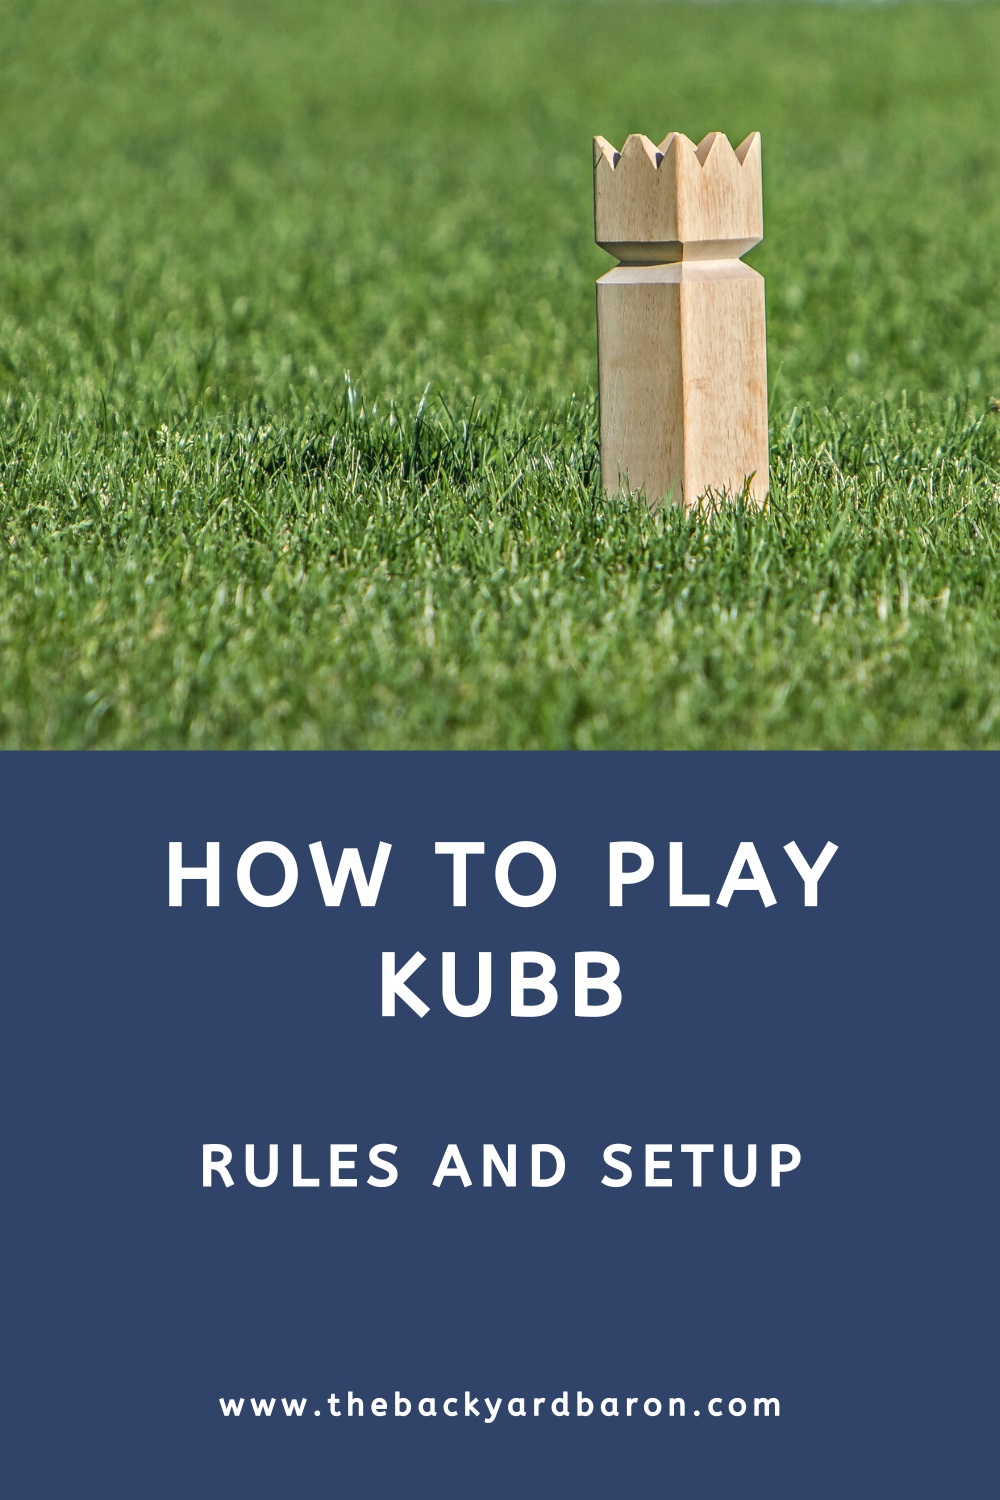 How to play Kubb (rules and setup)